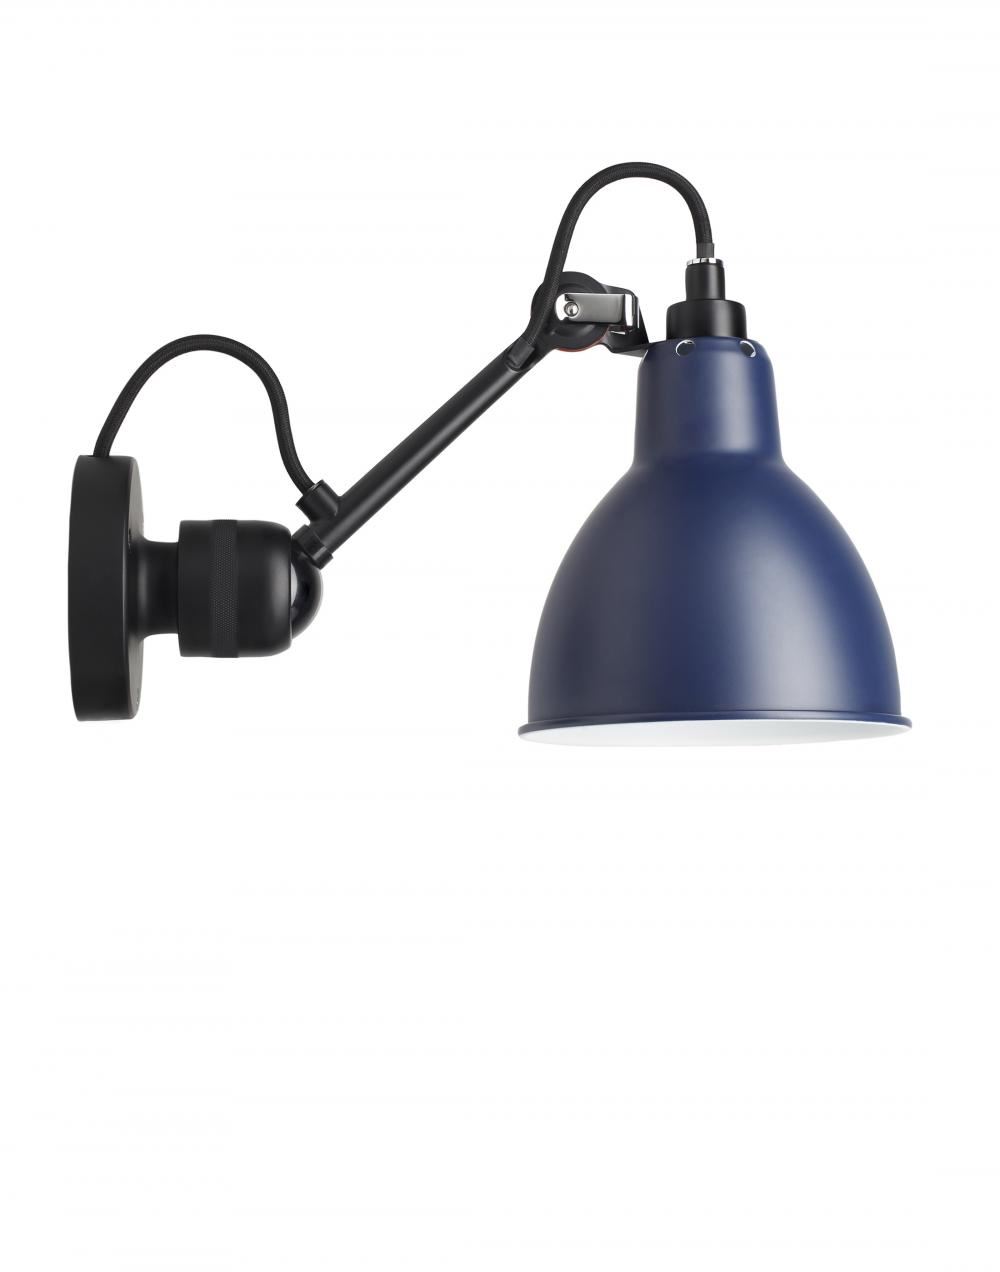 Lampe Gras 304 Small Wall Light Black Arm Blue Shade Round Hardwired